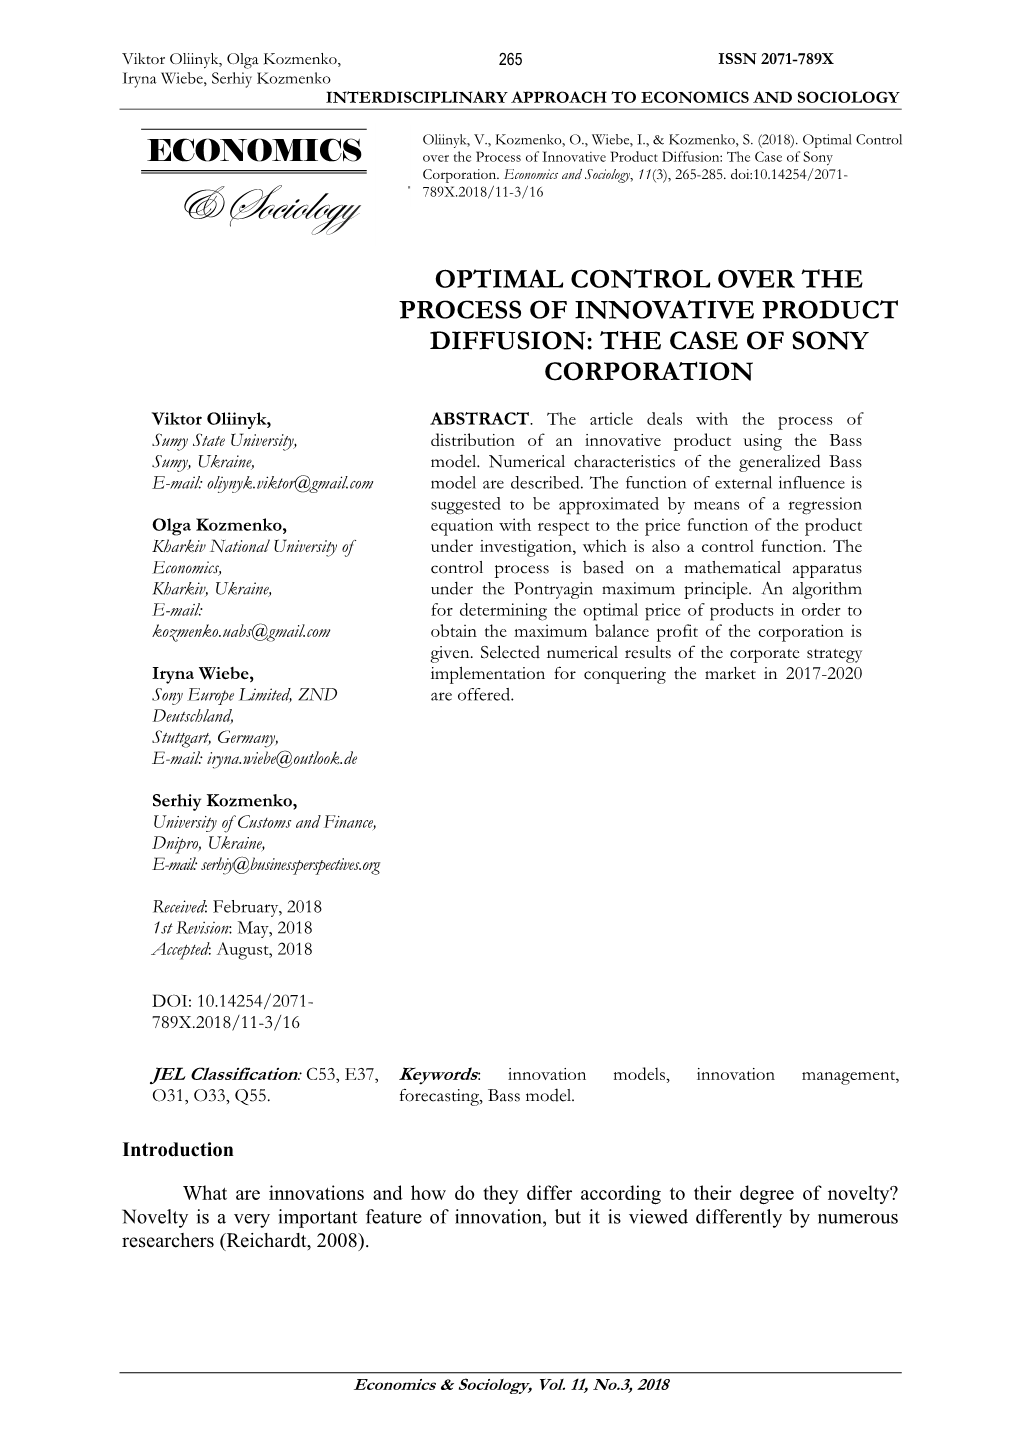 Optimal Control Over the Process of Innovative Product Diffusion: the Case of Sony Corporation